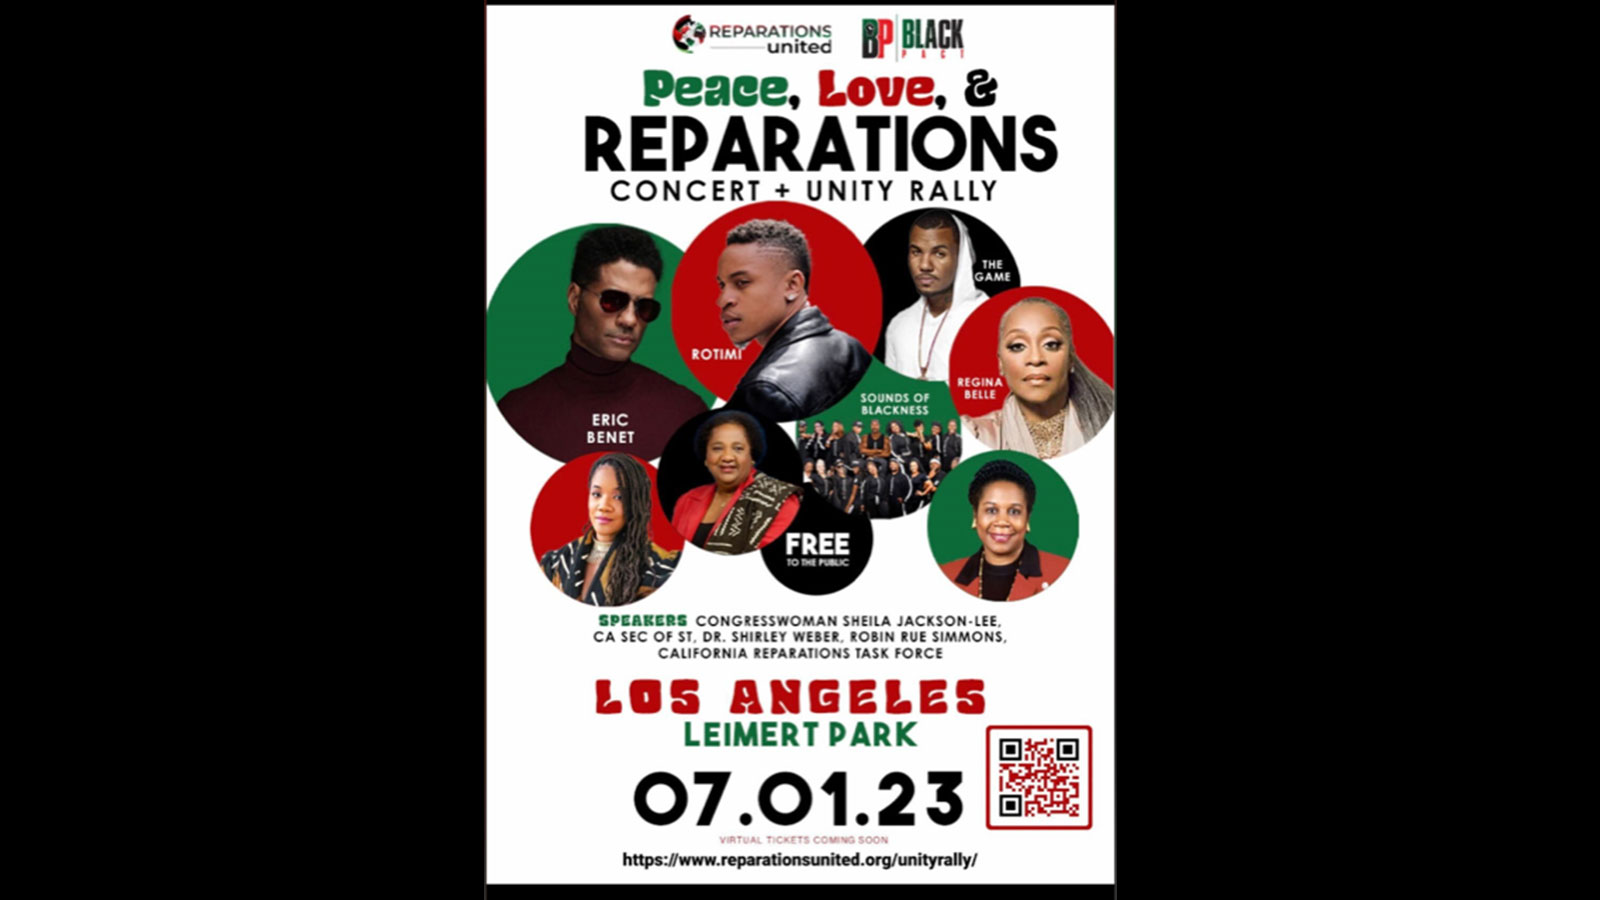 Saturday, July 1, 2023 — Reparations United and Black Pact presents Peace, Love, and Reparations Benefit Concert